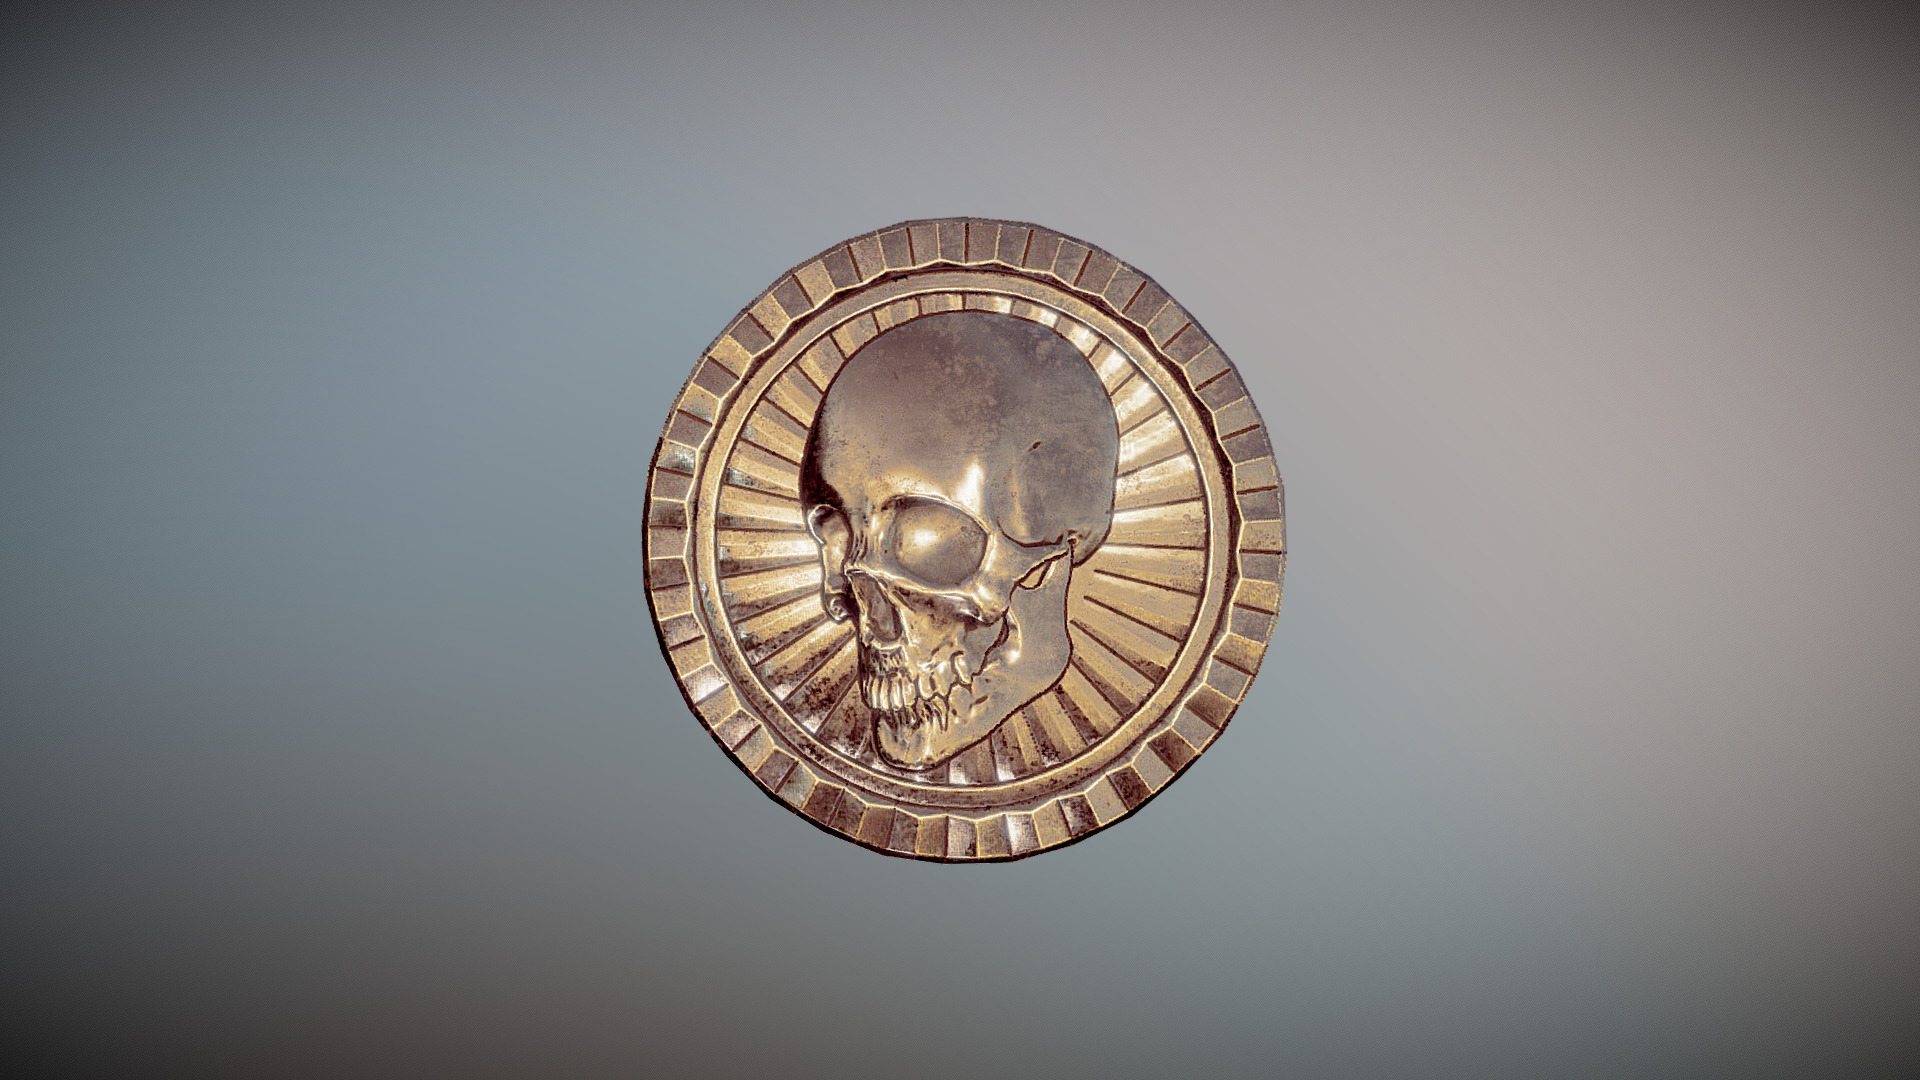 3D model Skull Coin lowpoly game asset - This is a 3D model of the Skull Coin lowpoly game asset. The 3D model is about a circular object with a design on it.